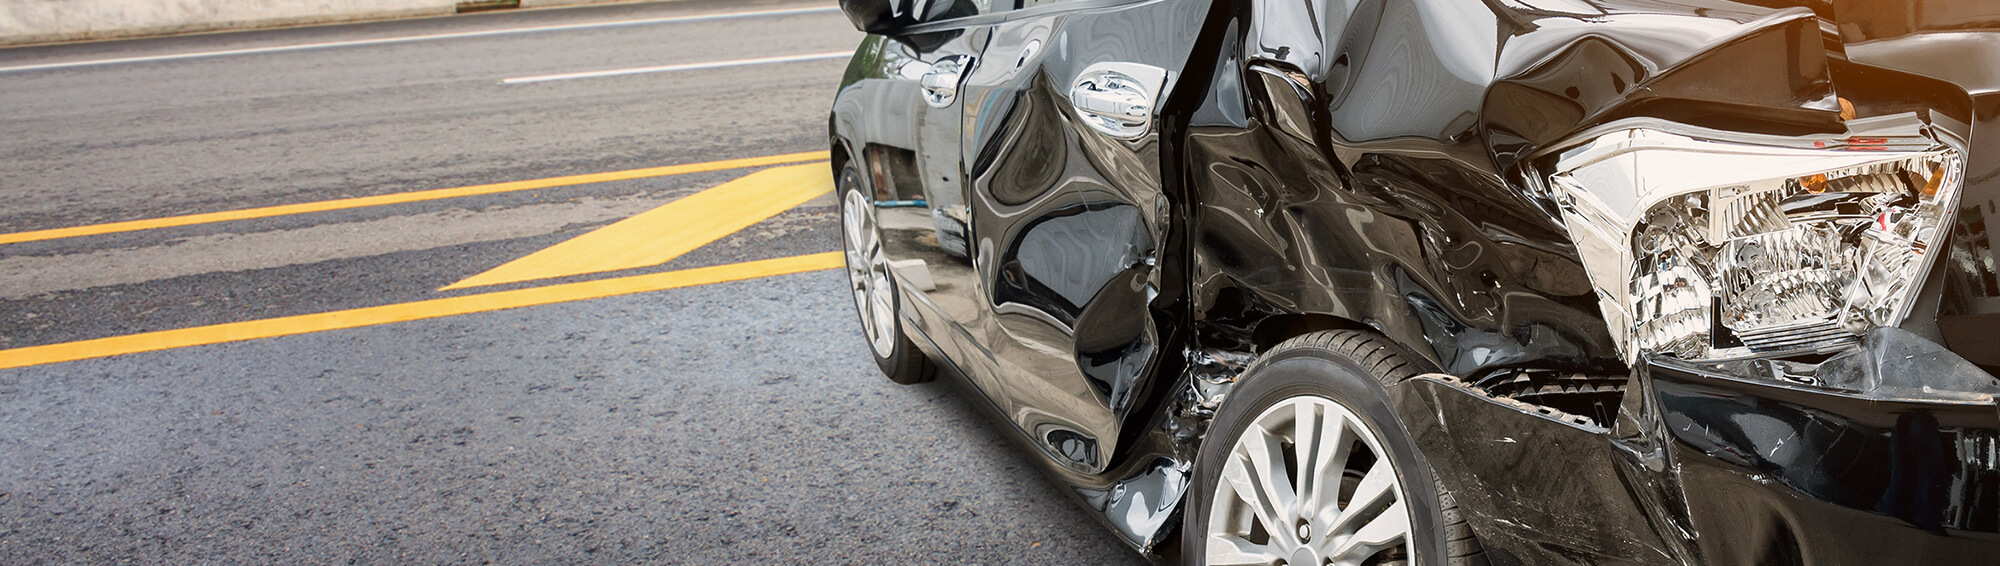 What You Risk When You Wait to Call a Lawyer after a Crash